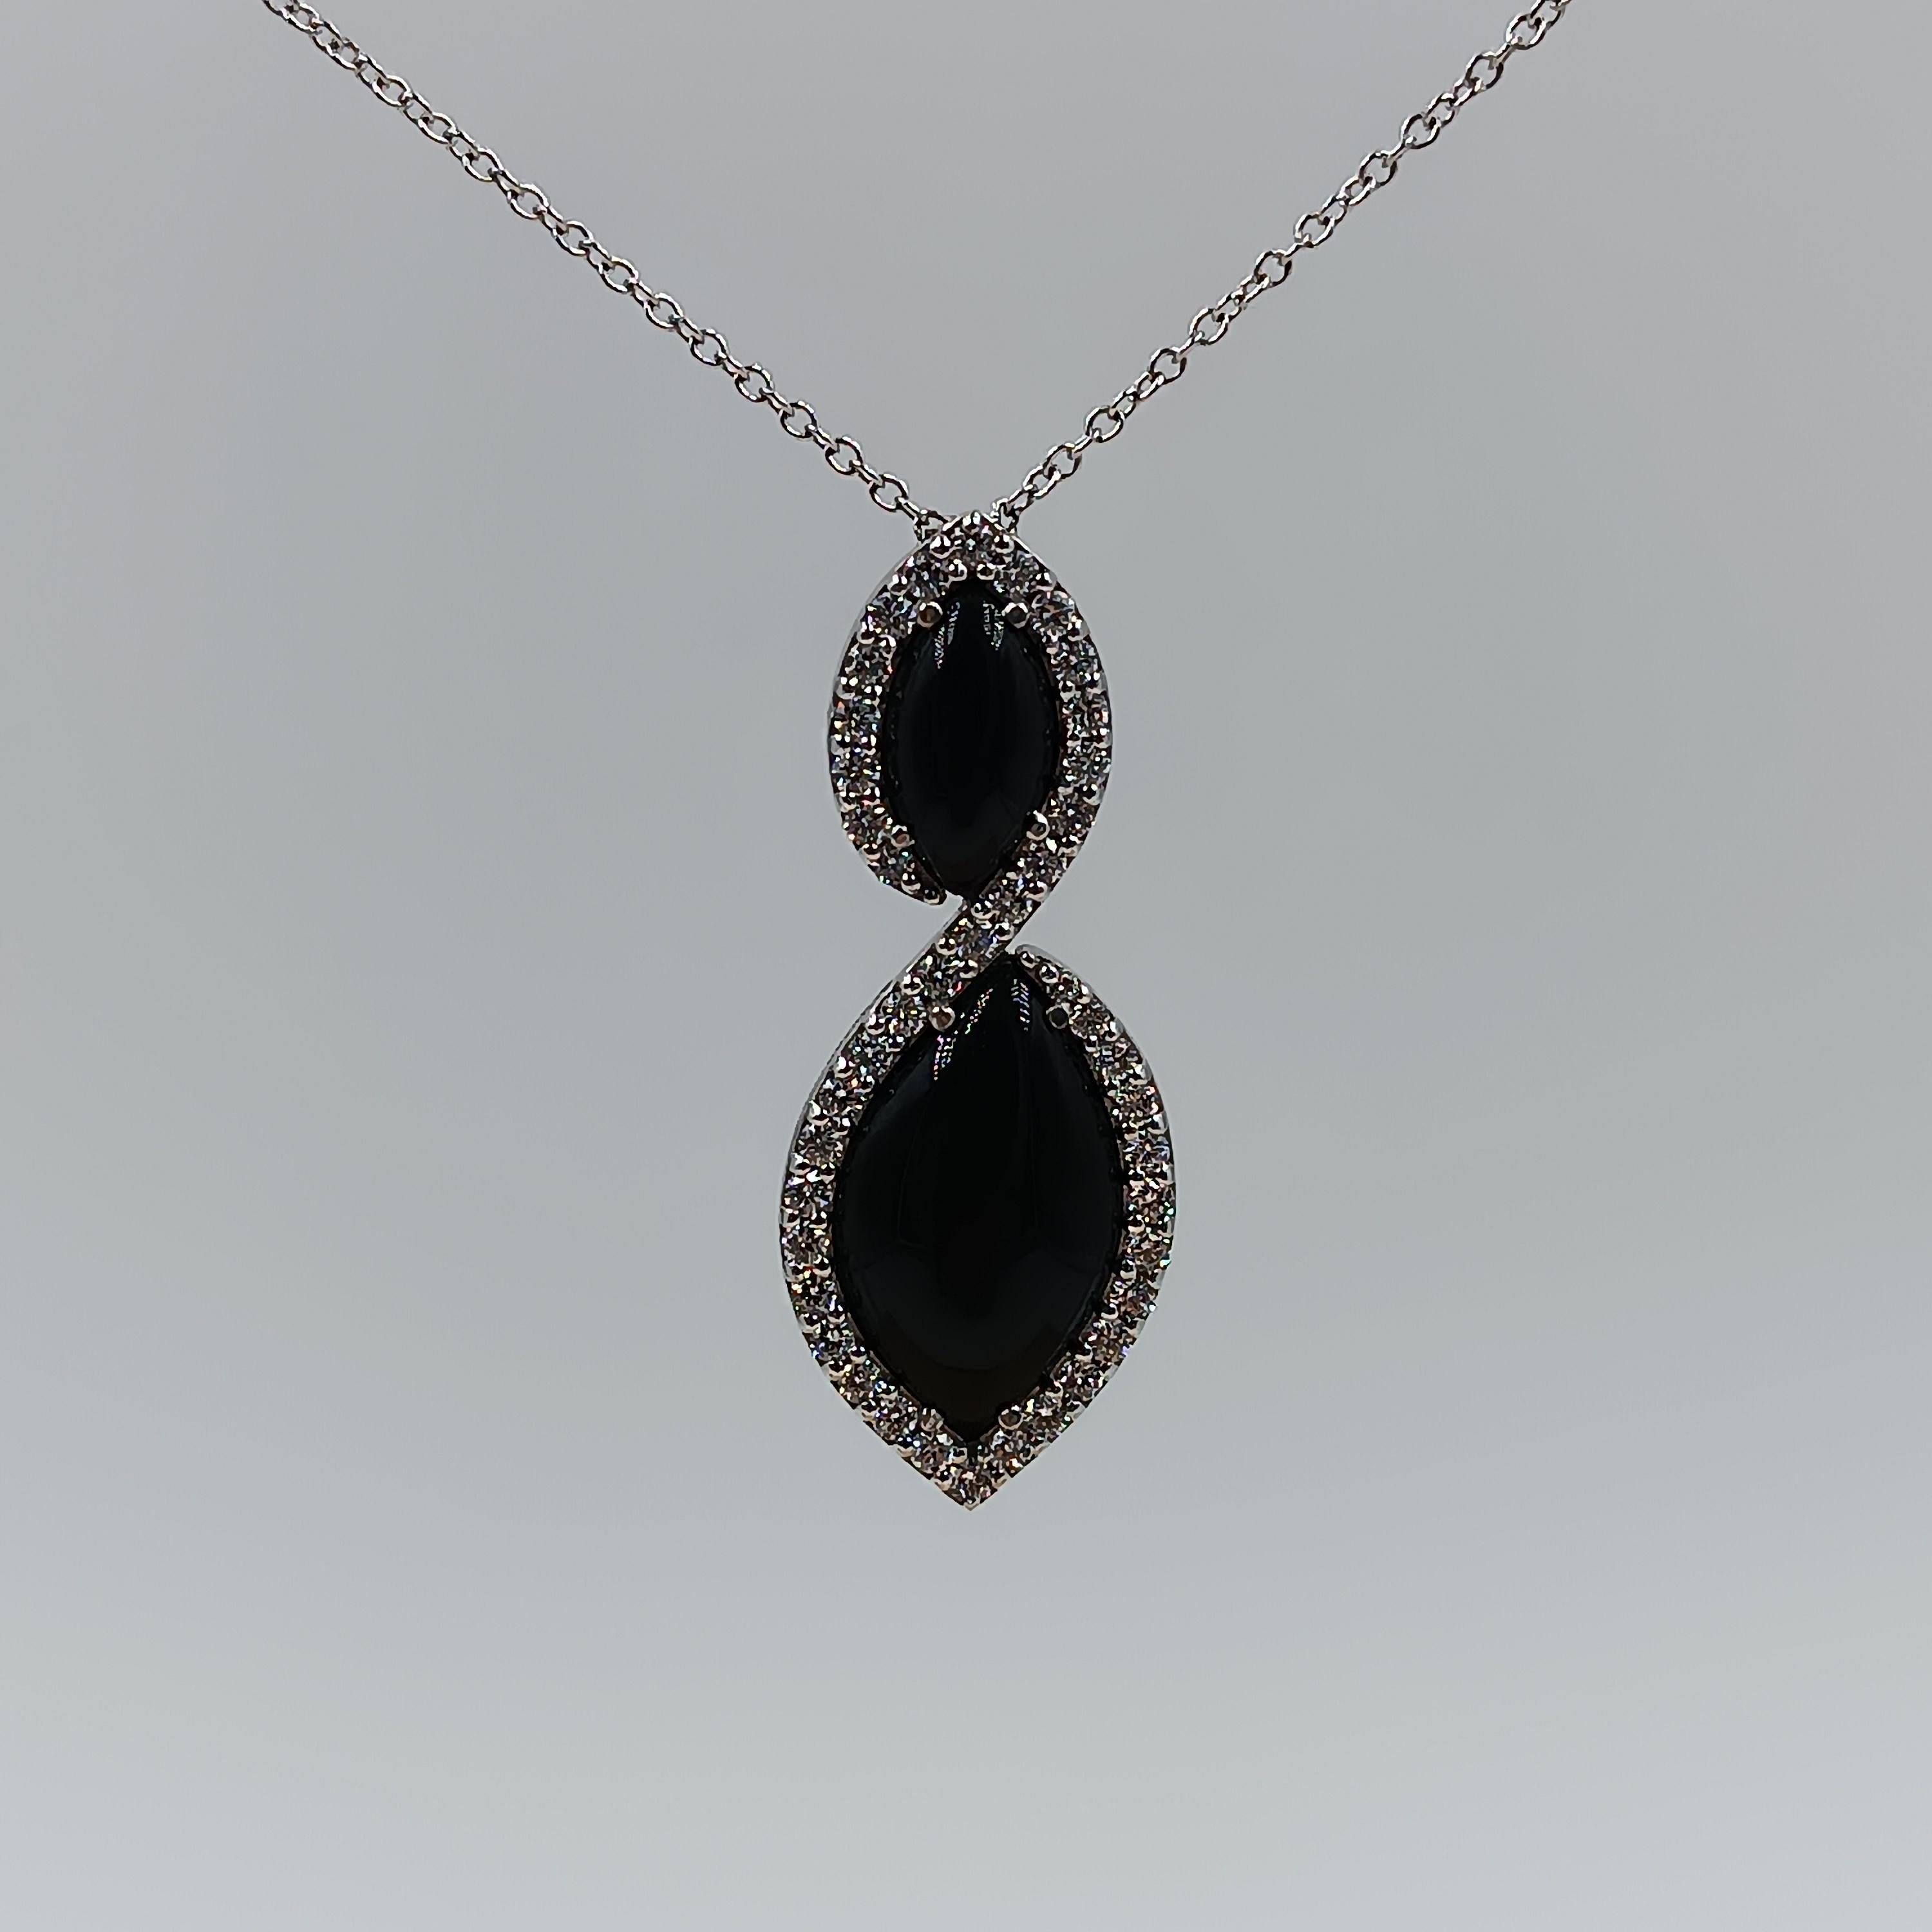 This wonderful Leo Milano pendant from our Pagano collection shows in every detail a very complicate yet perfectly done workmanship. The pendant and the chain are in 18 carat white gold with black onyx . The object weights 12,08 grams the total